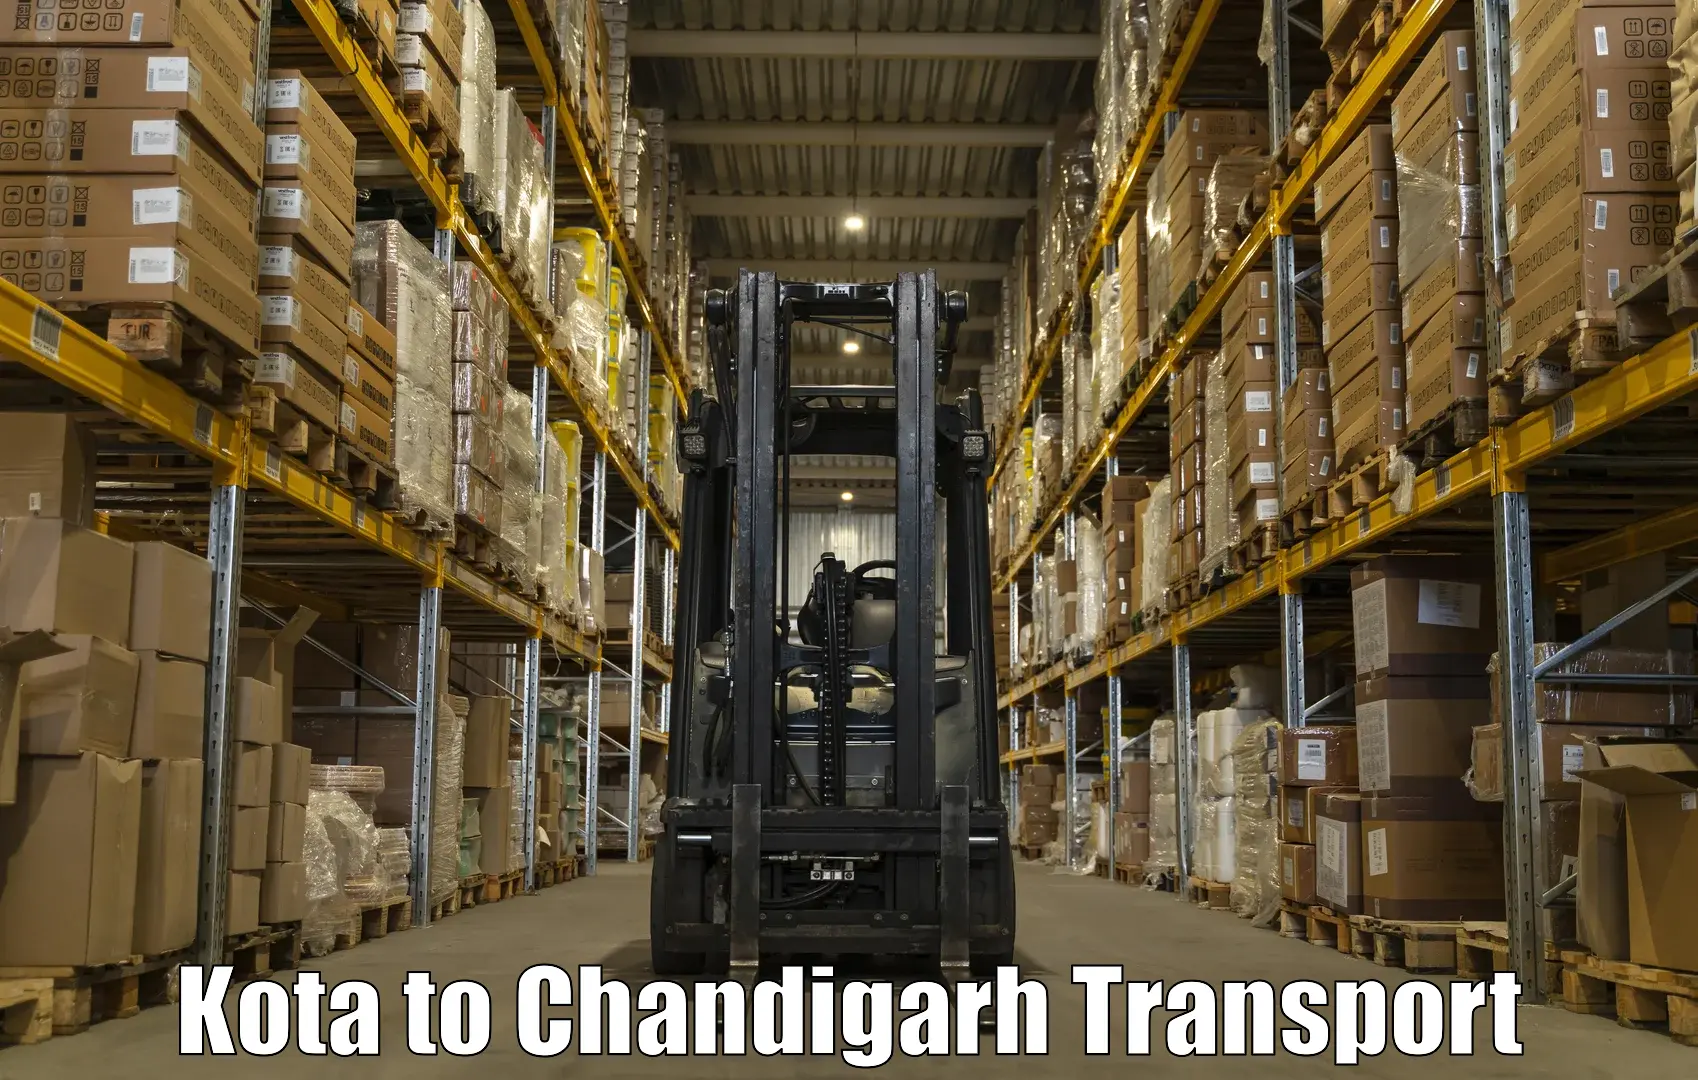 Transport shared services Kota to Chandigarh